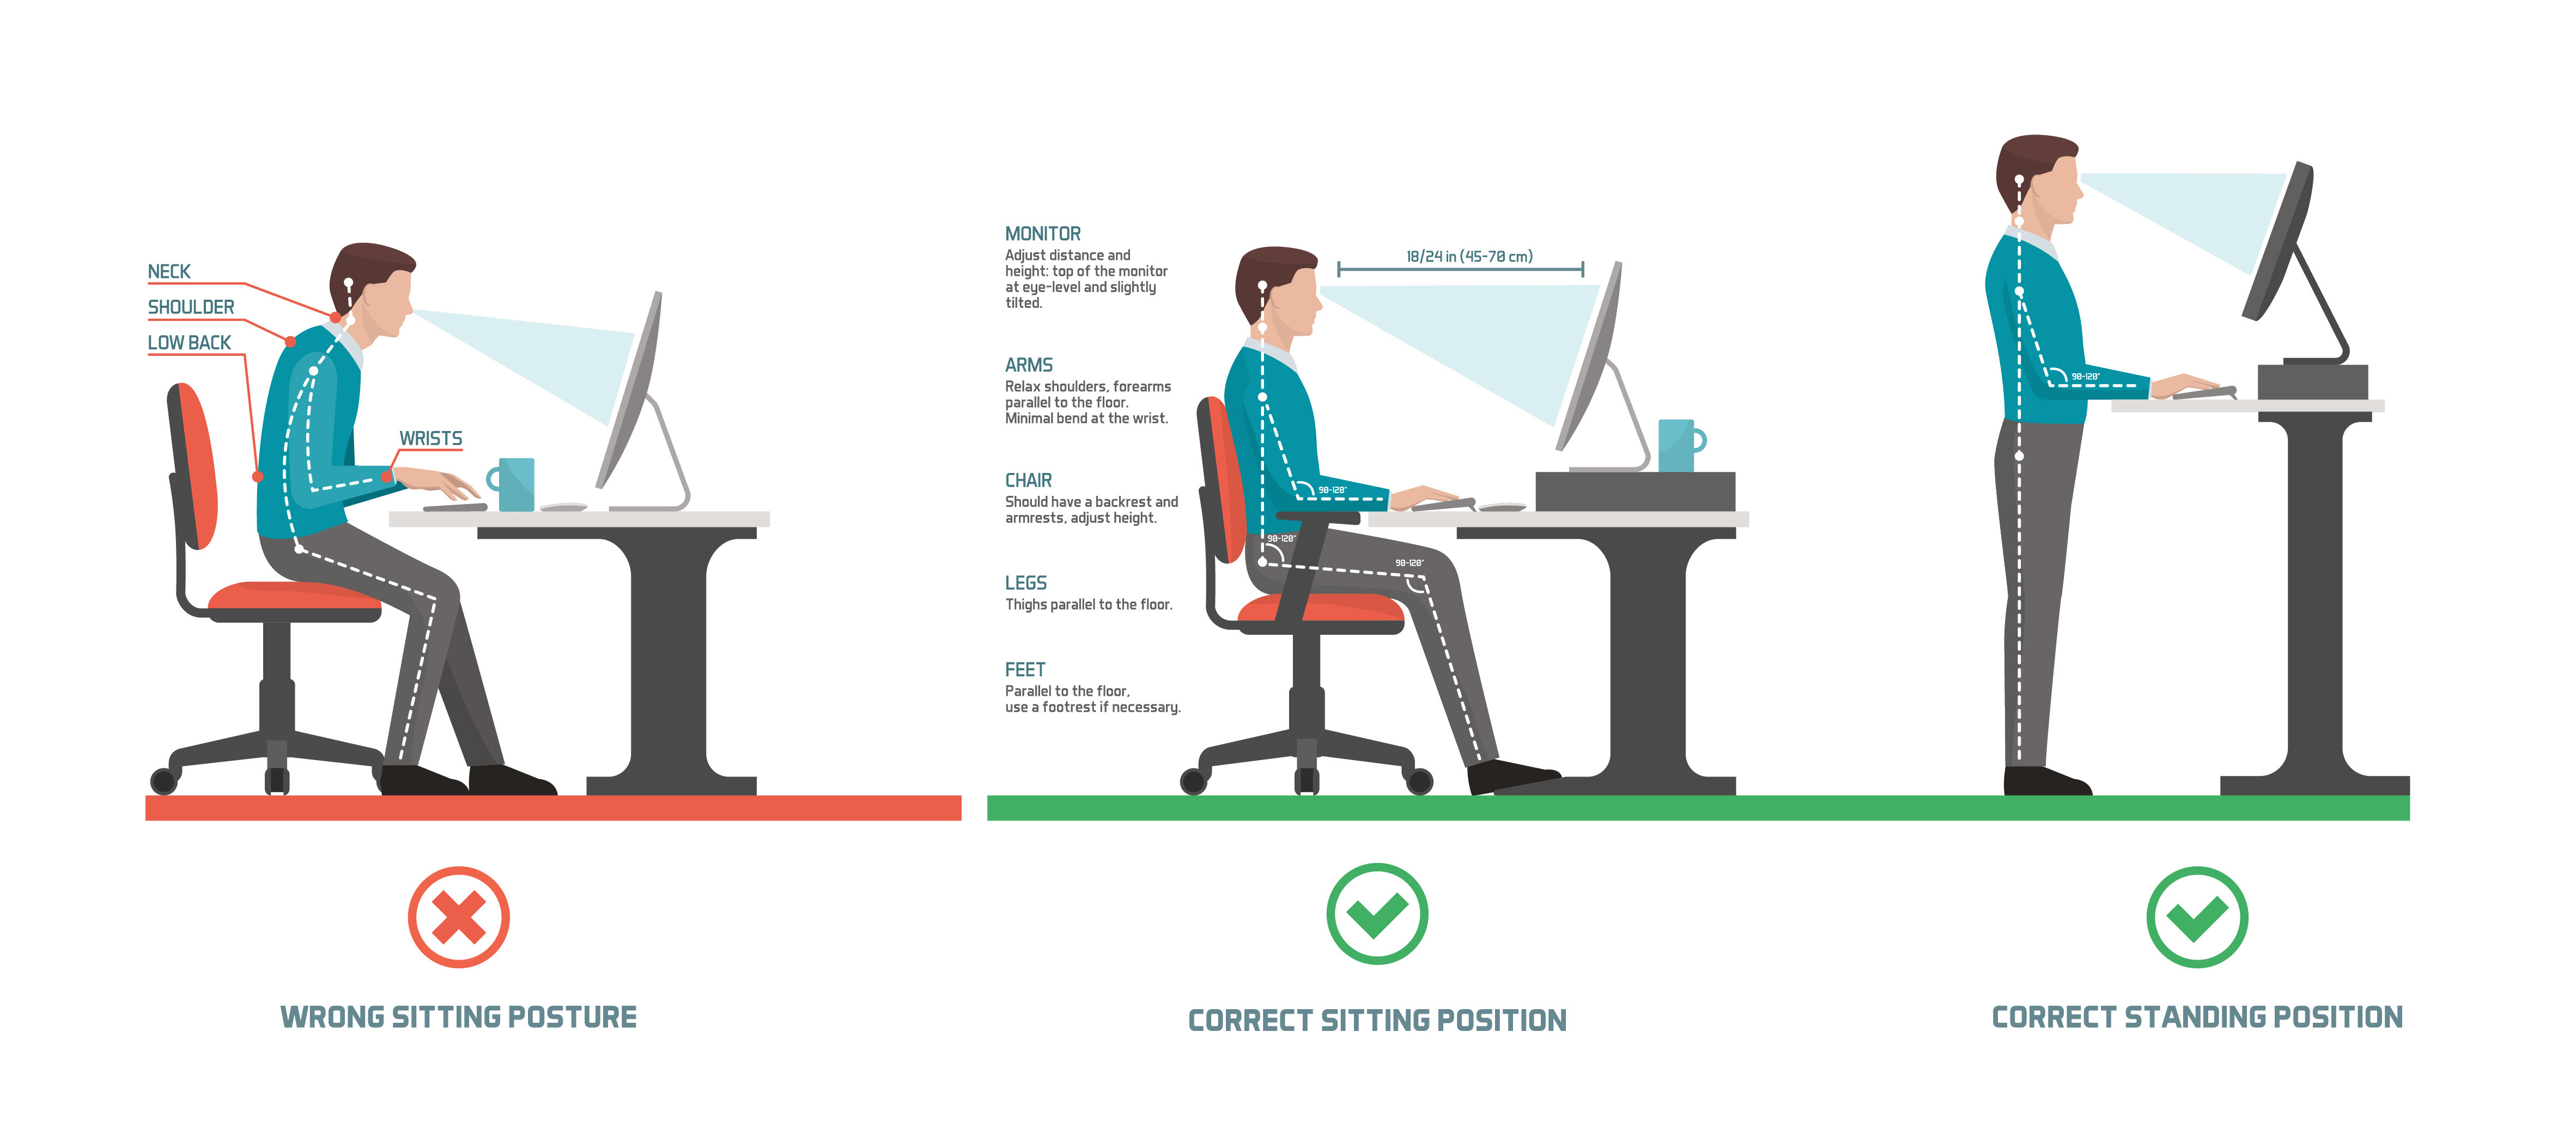 Best Posture for Sitting at a Desk all Day - Sydney Sports and